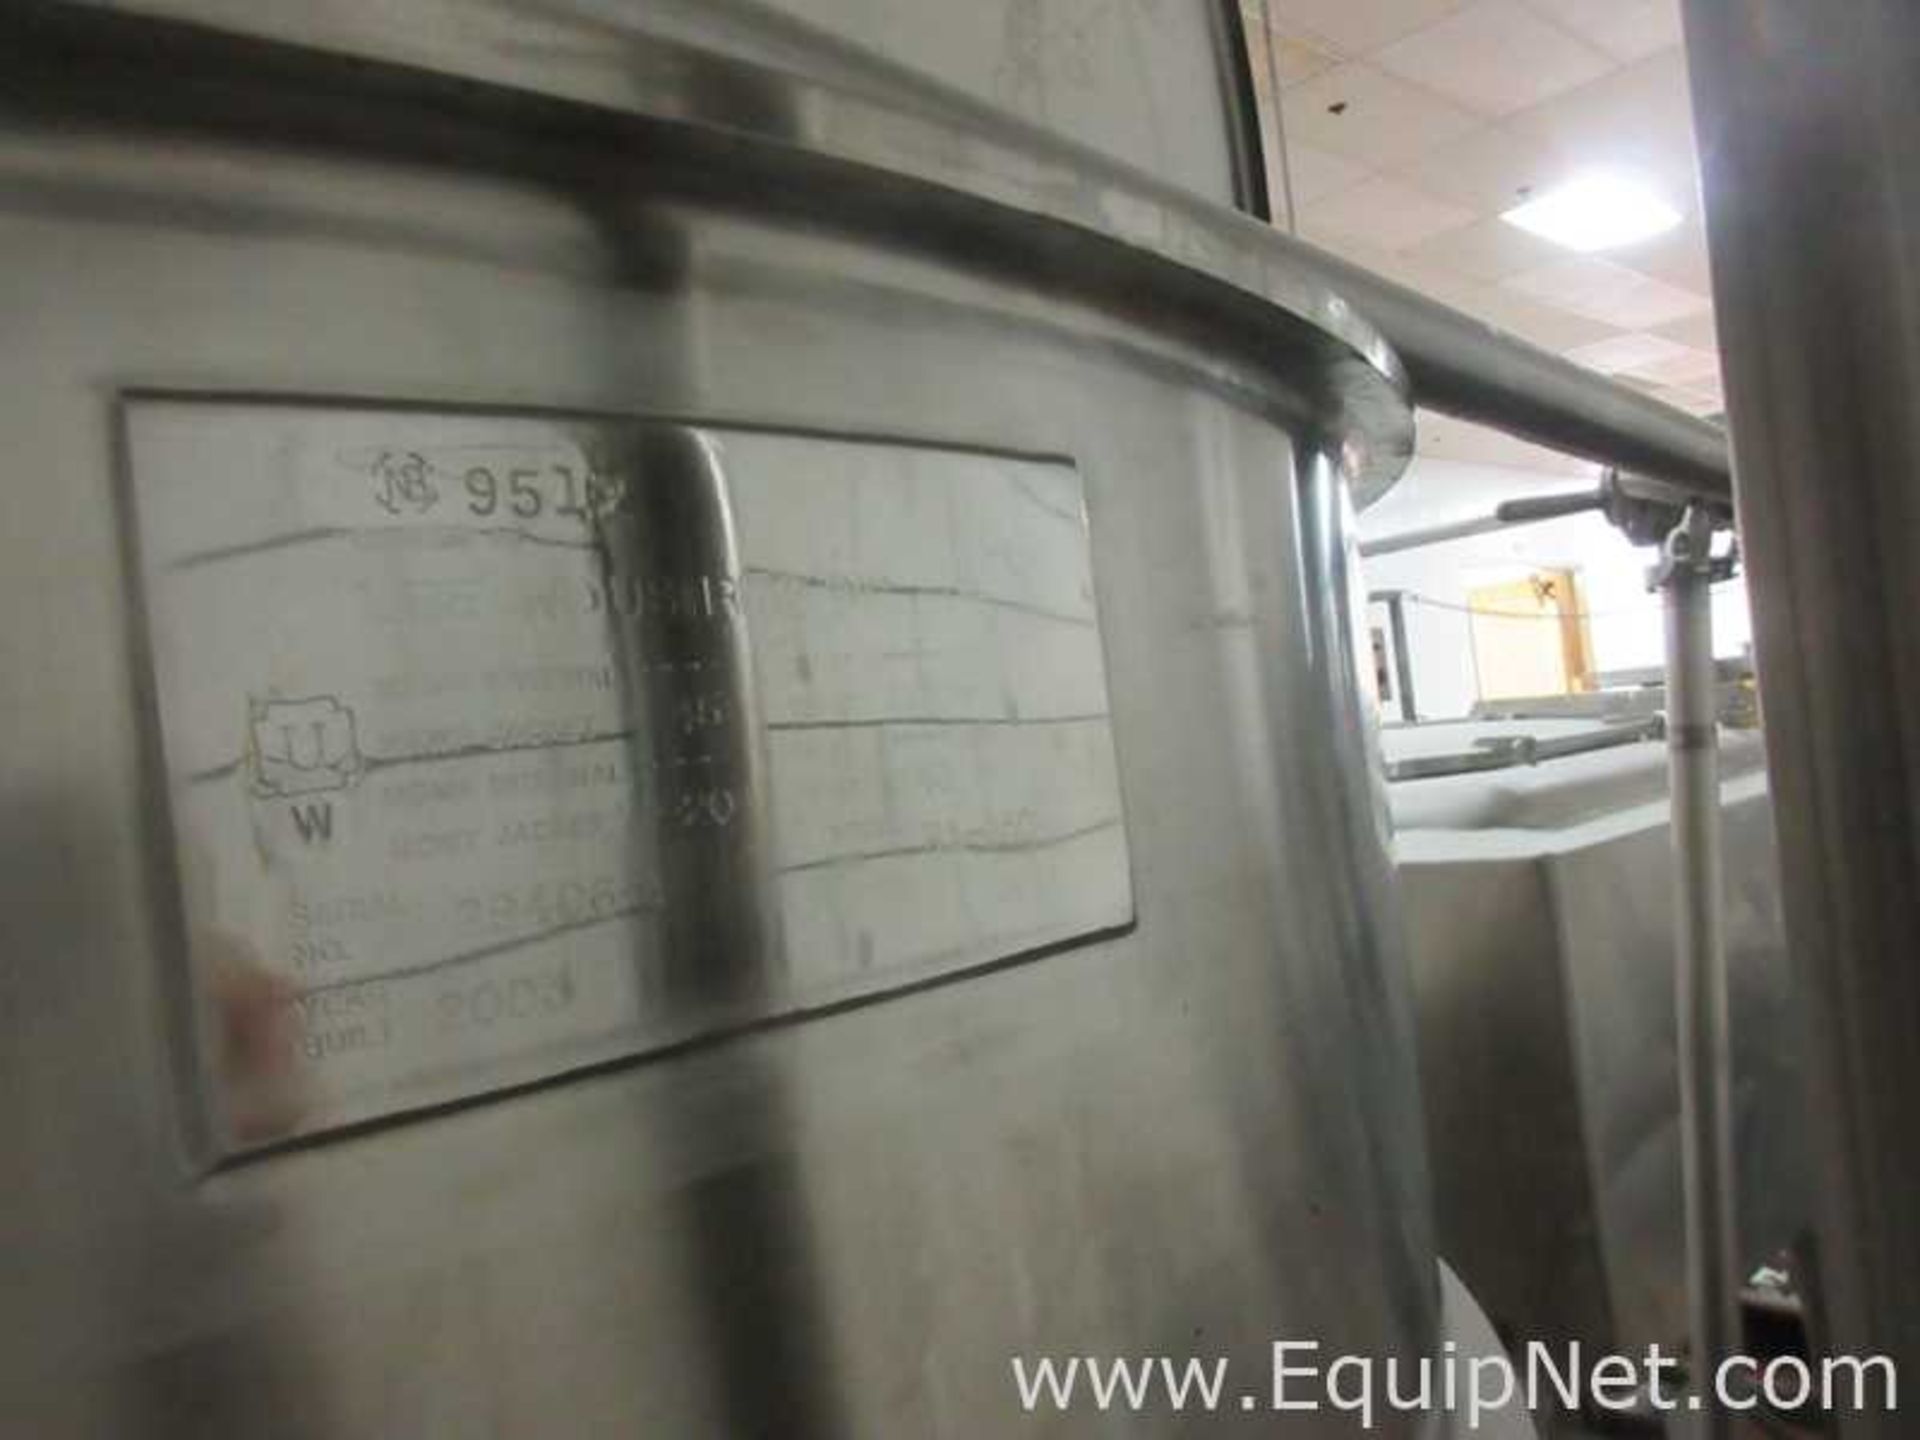 250 Gallon Lee Jacketed Sanitary Stainless Steel Kettle With Sweep Agitator - Image 6 of 6